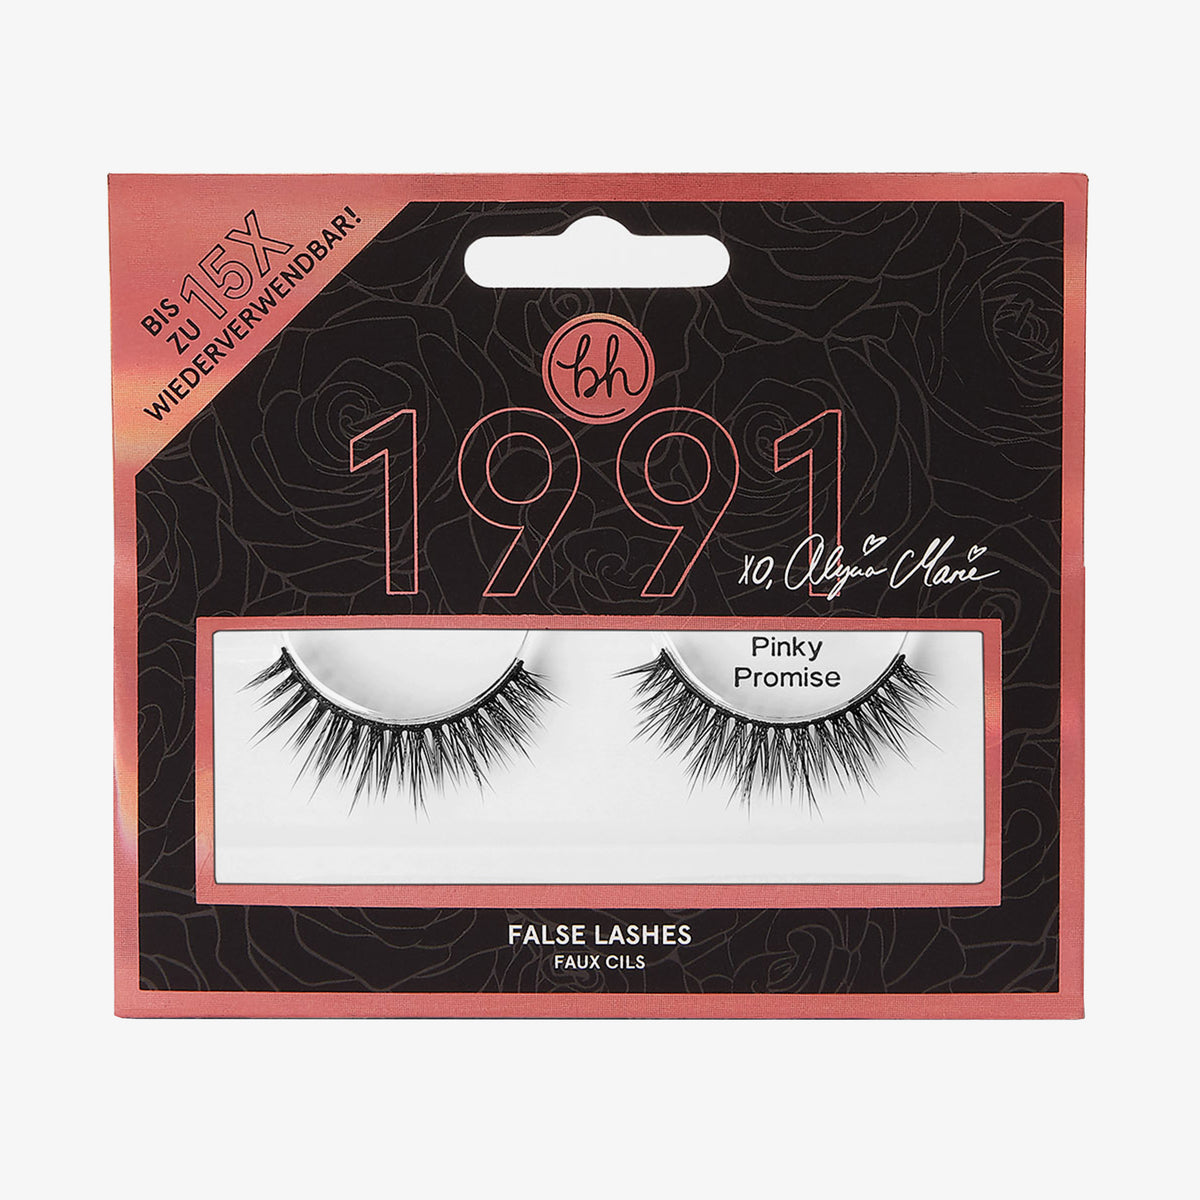 BH Cosmetics | 1991 by Alycia Marie False Lashes Pinky Promise